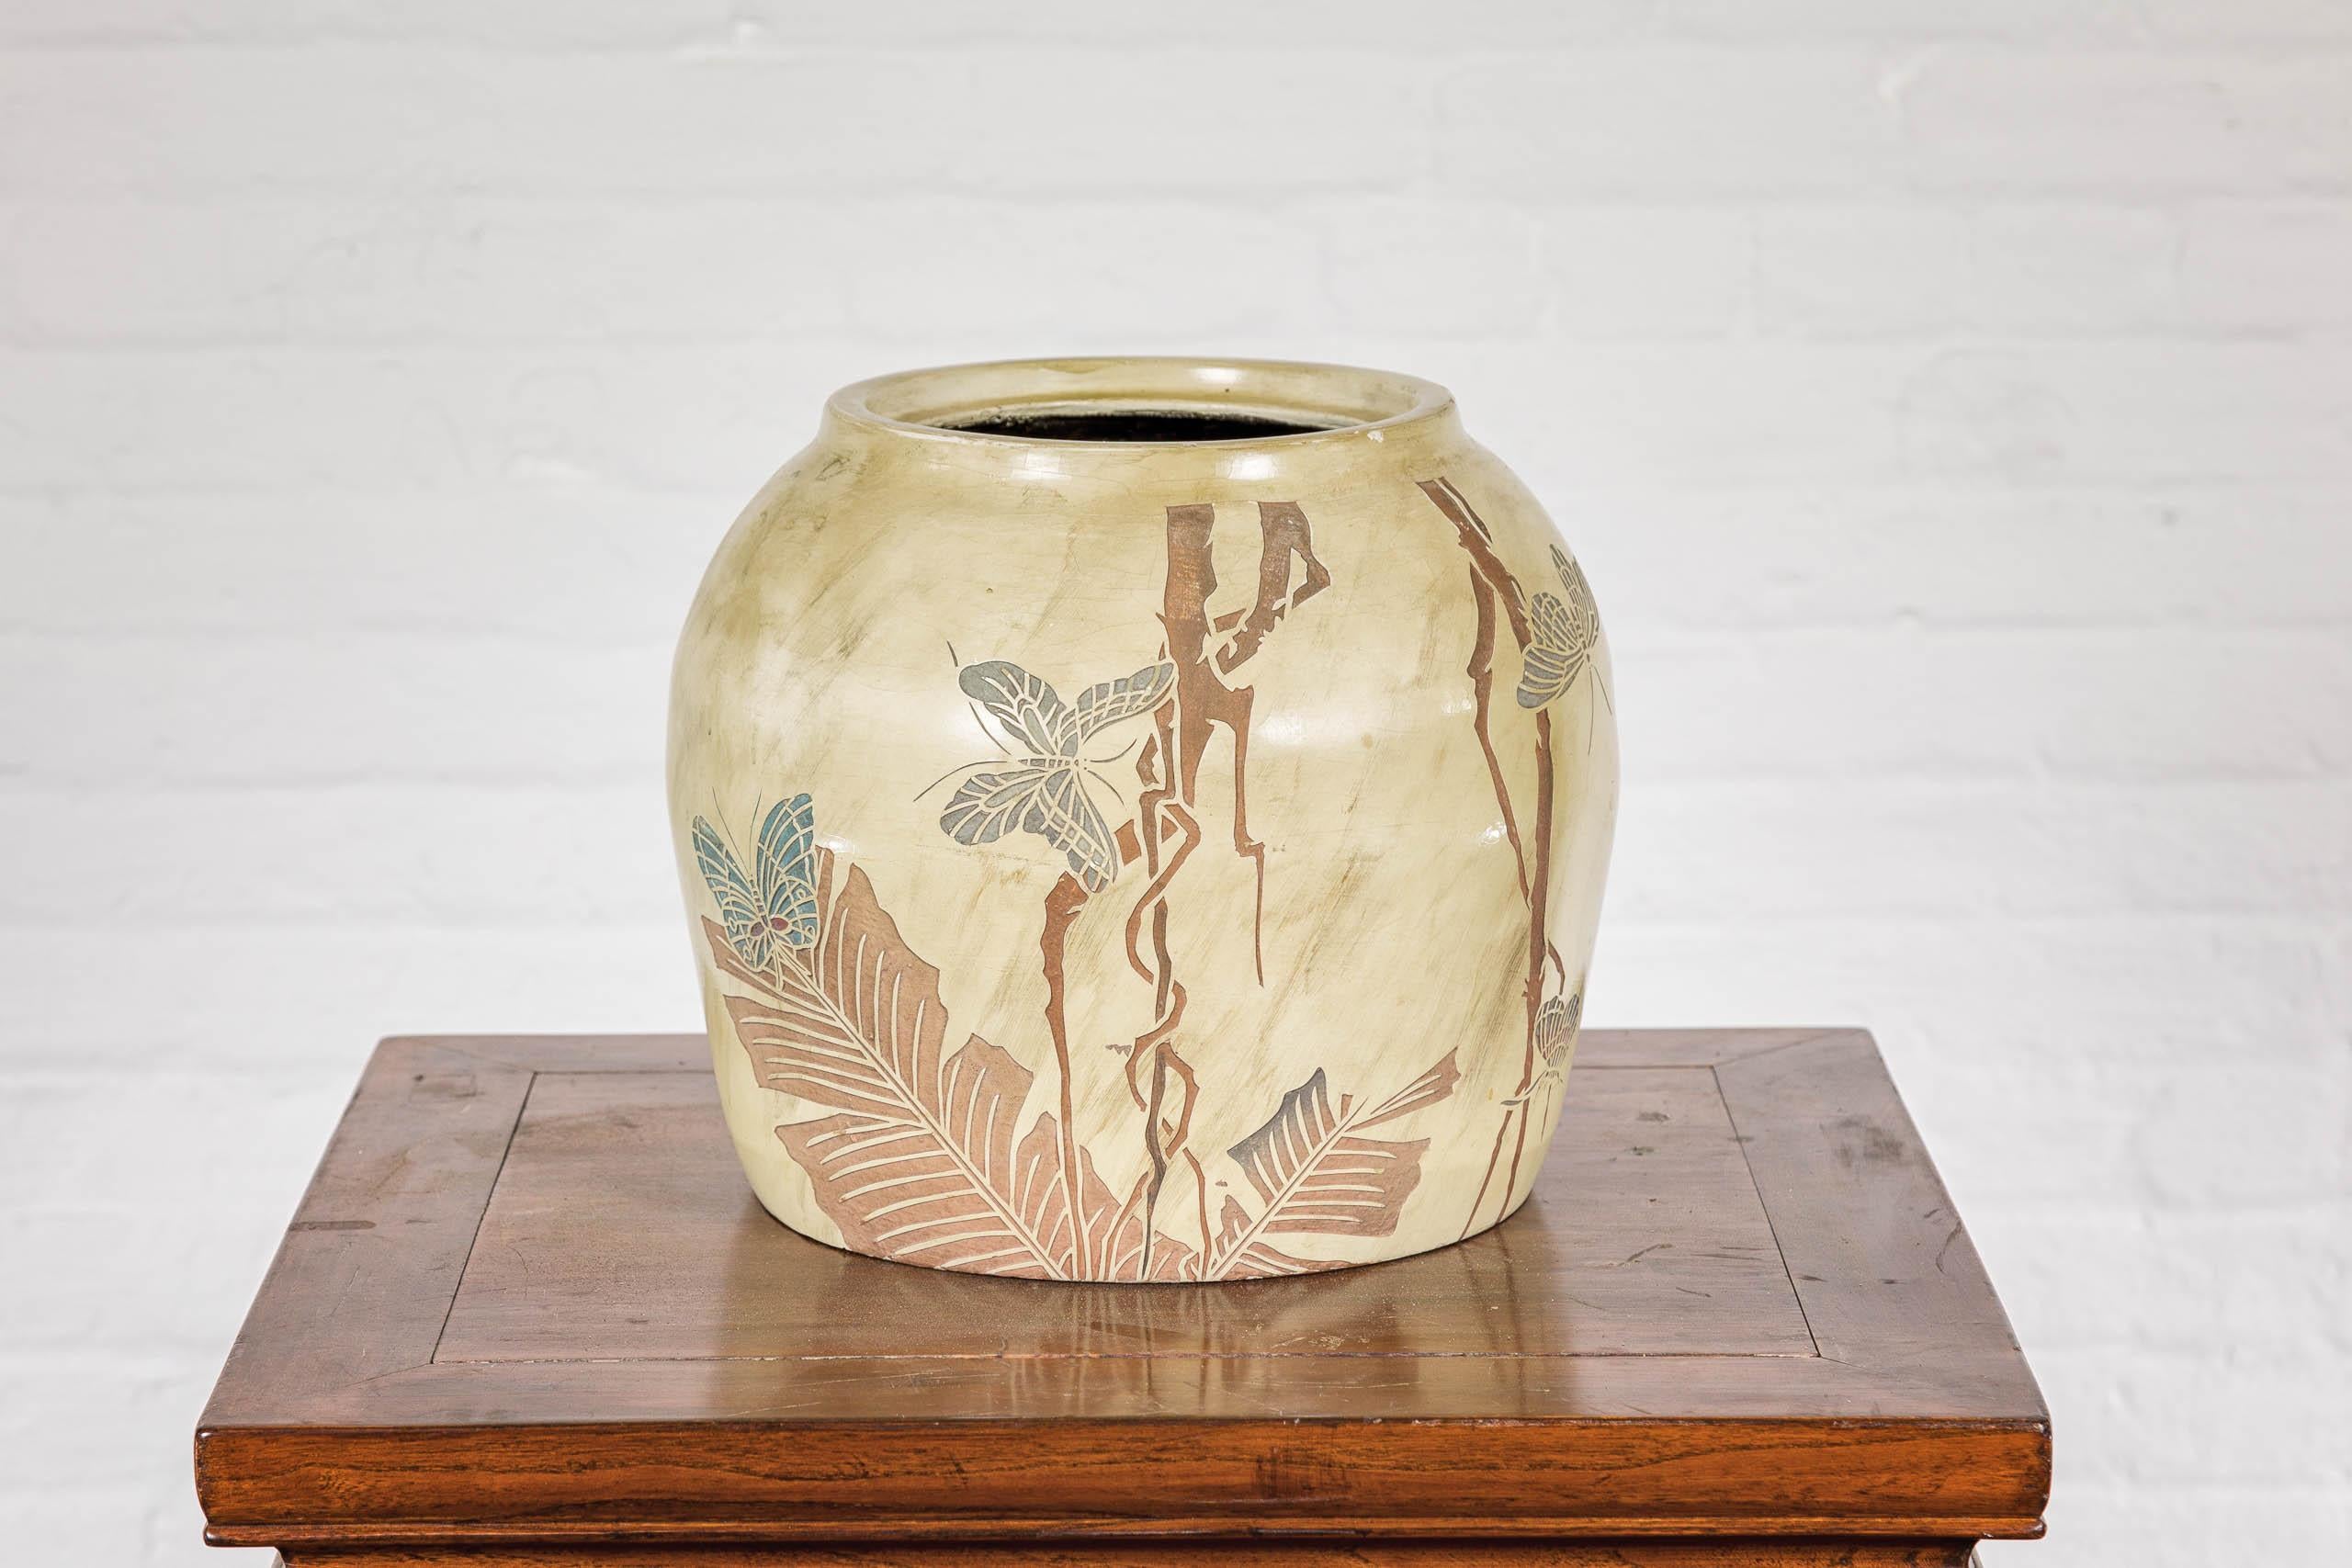 Carved Japanese Antique Mustard Glaze Ceramic Planter with Incised Butterfly Decor For Sale